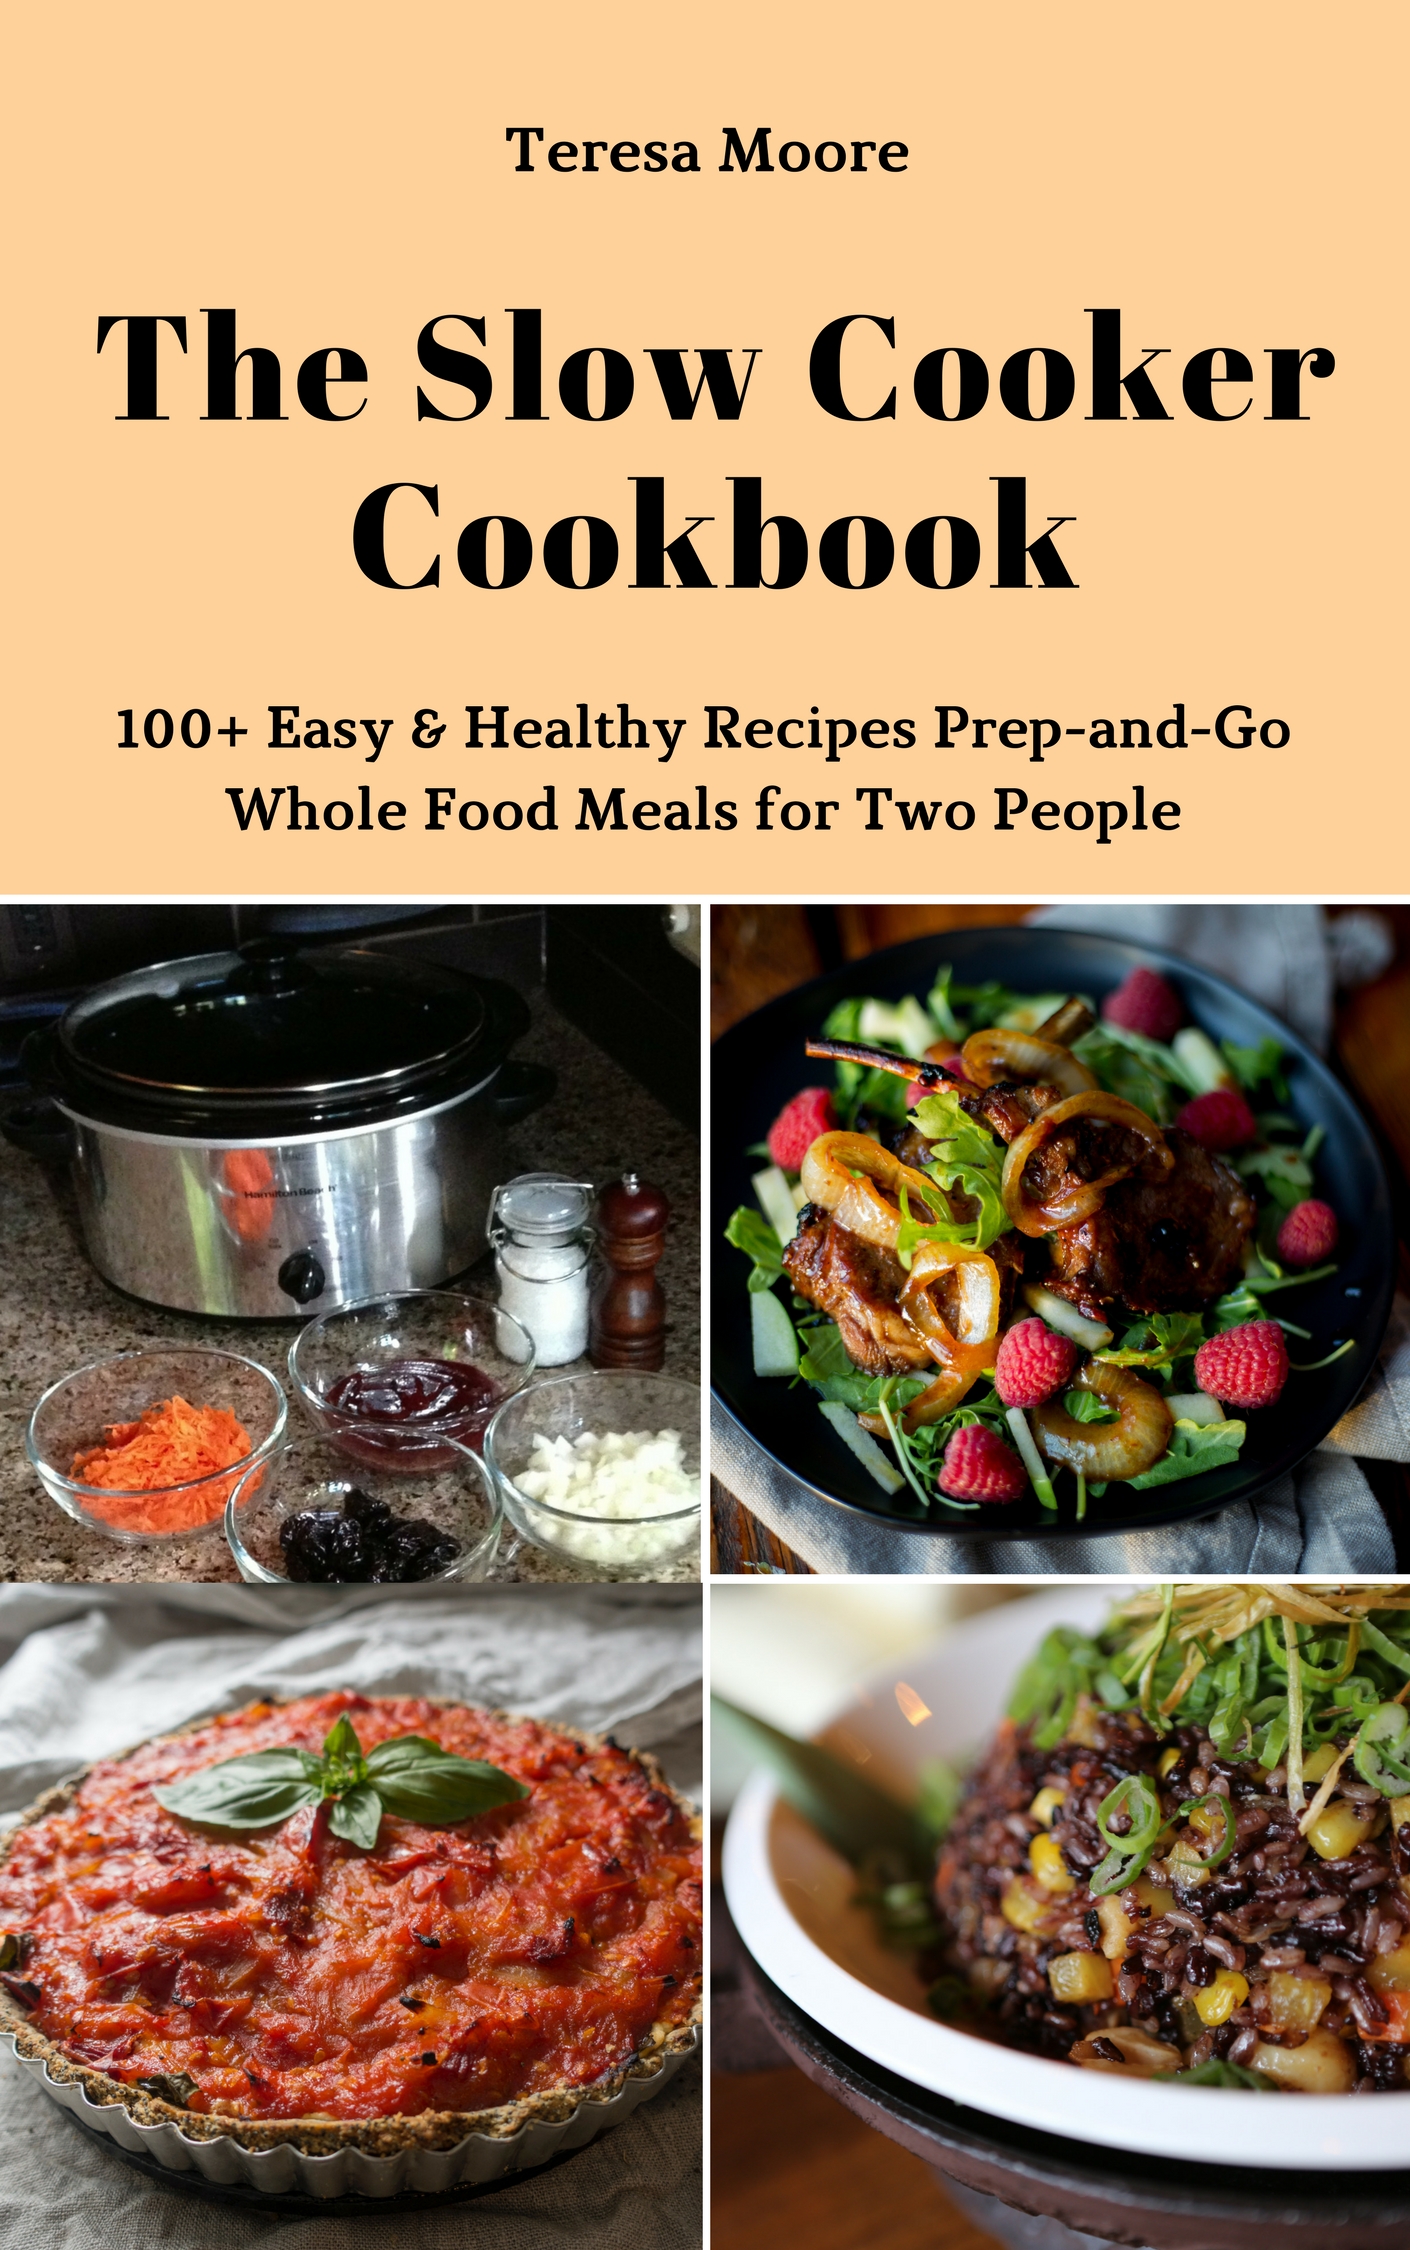 FREE: The Slow Cooker Cookbook: 100+ Easy & Healthy Recipes Prep-and-Go Whole Food Meals for Two People by Teresa Moore